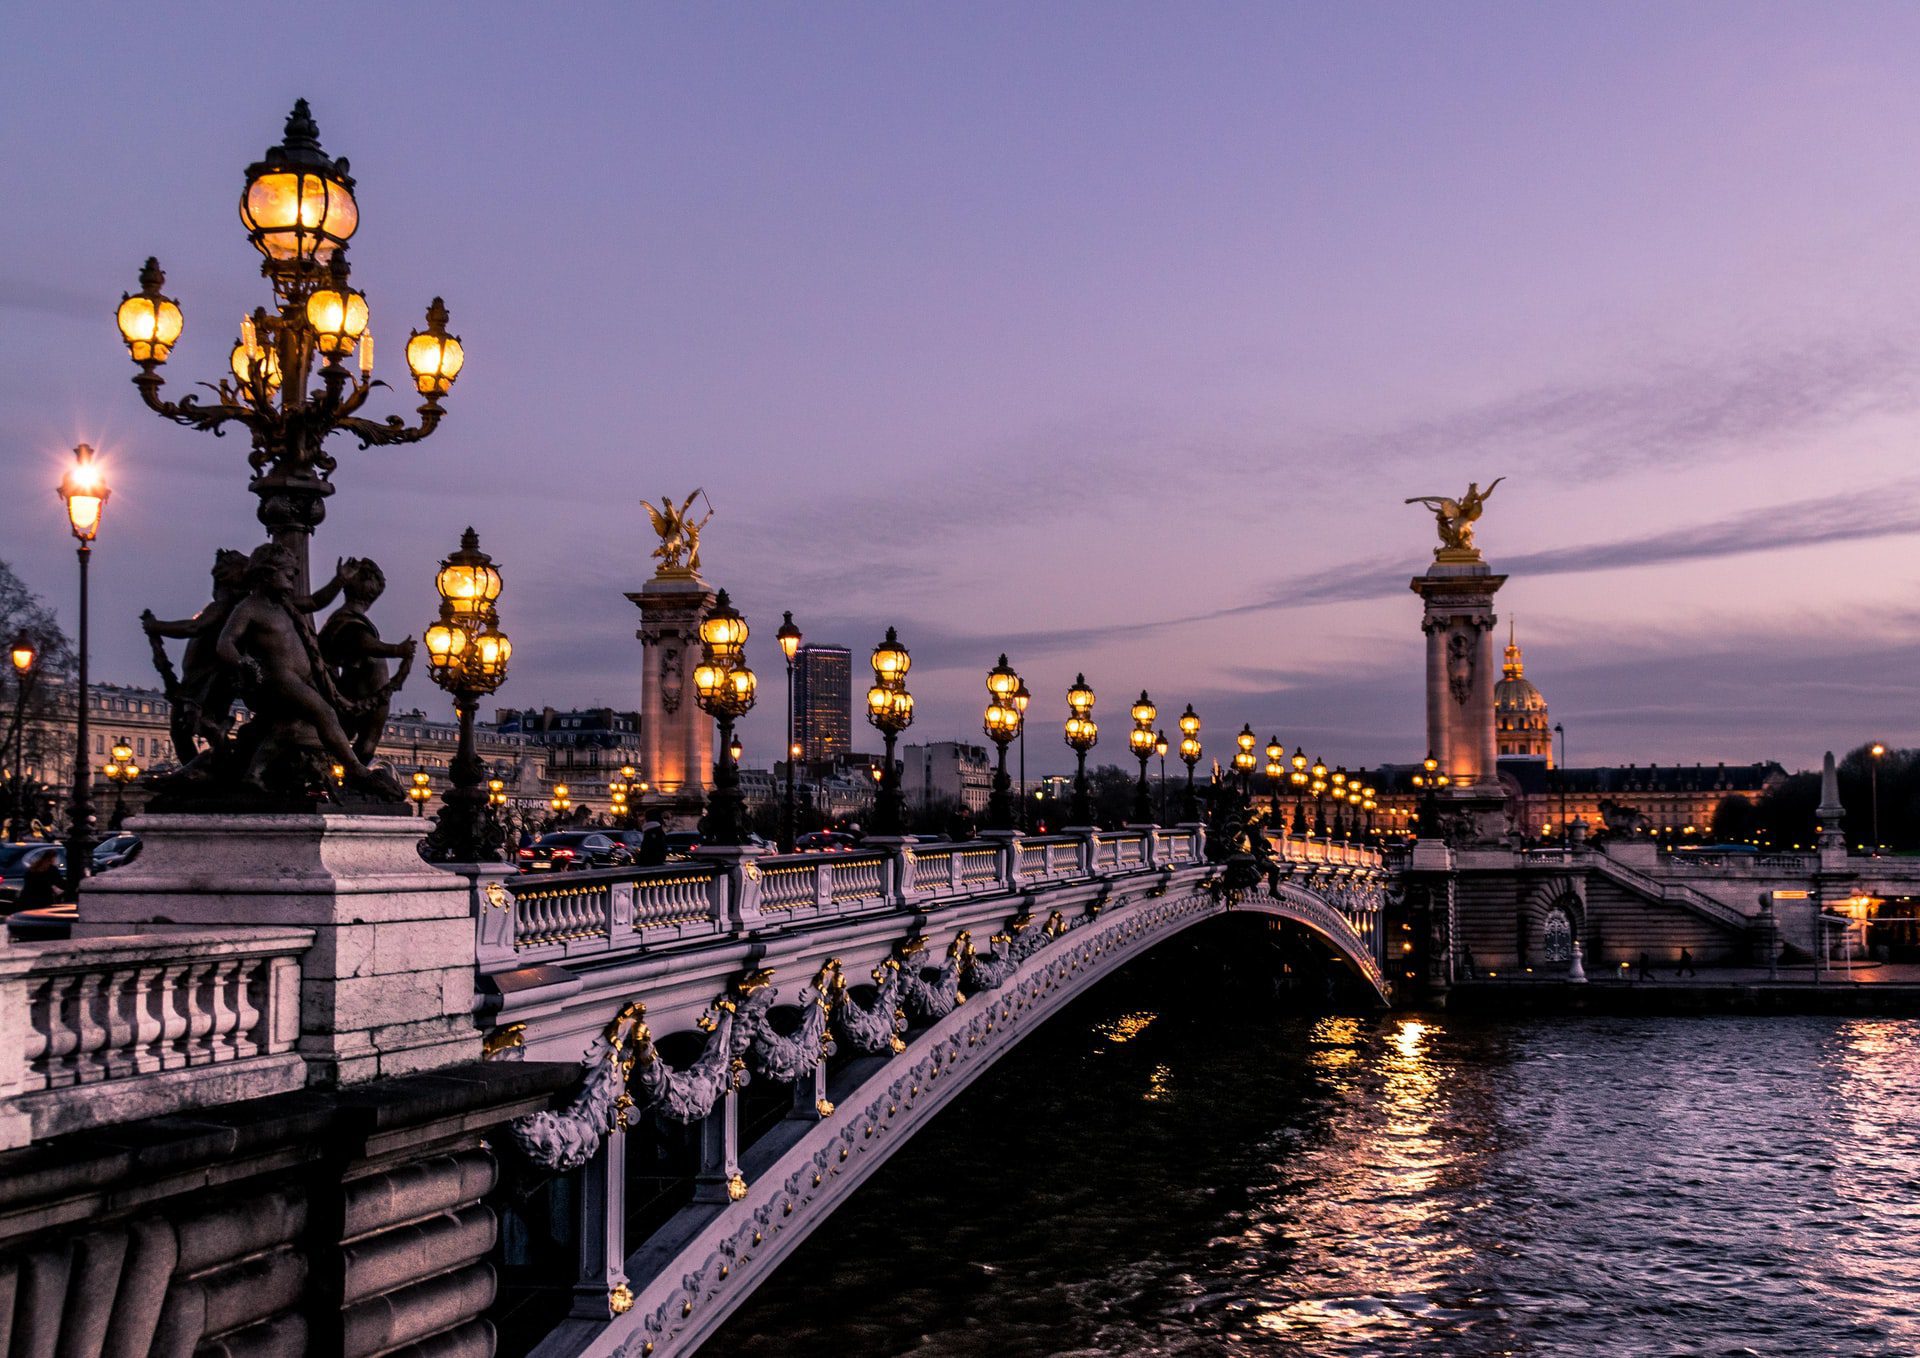 Parisian bridge with lights over a body of water at dusk.